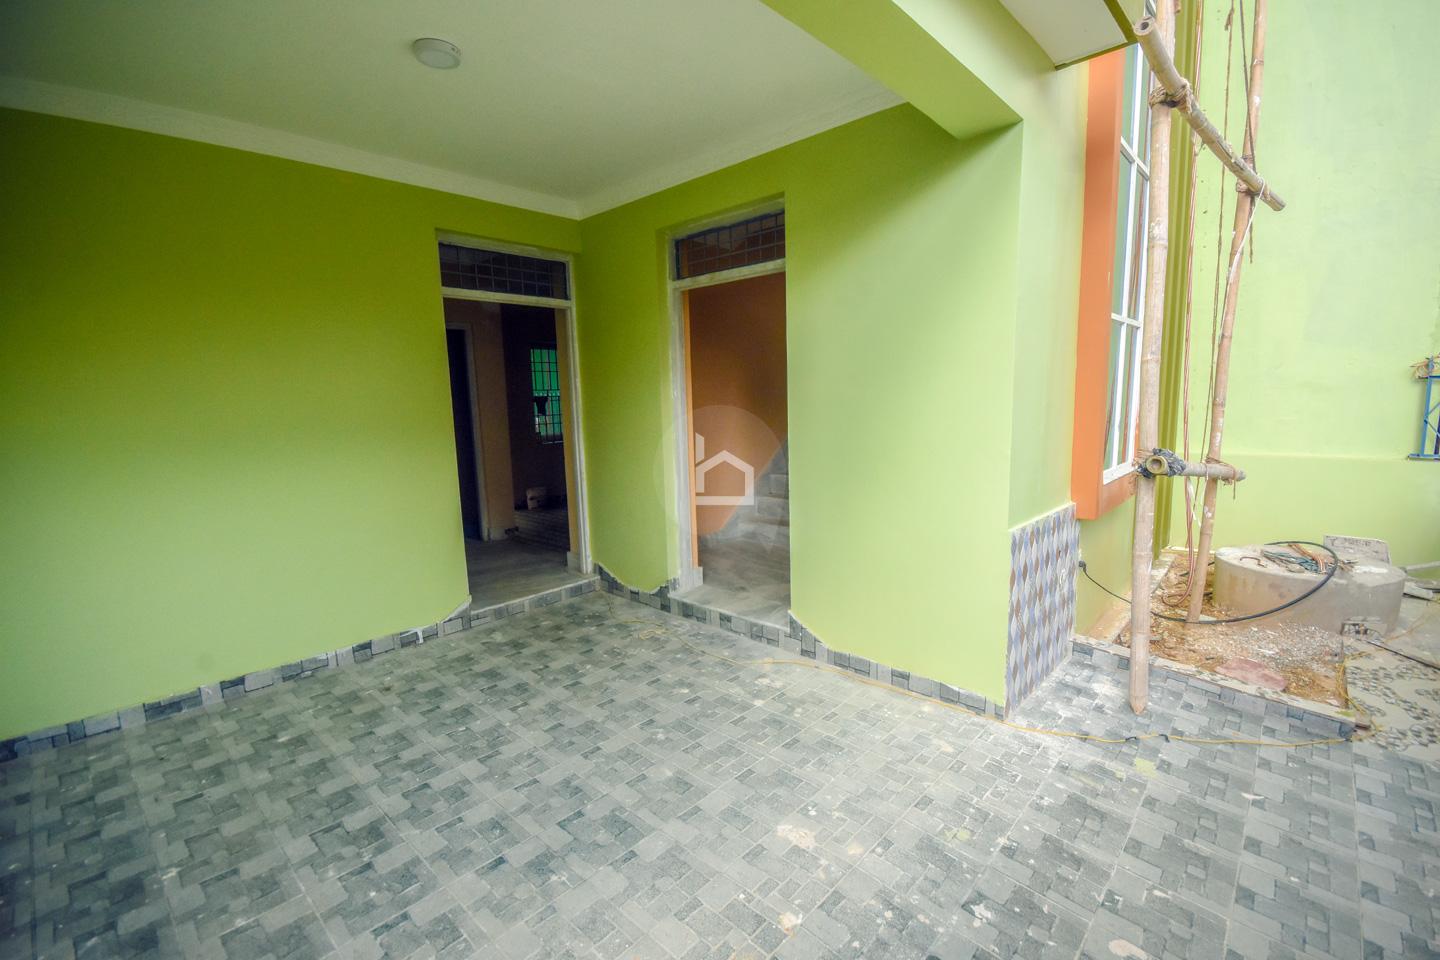 SOLD OUT : House for Sale in Imadol, Lalitpur Image 2